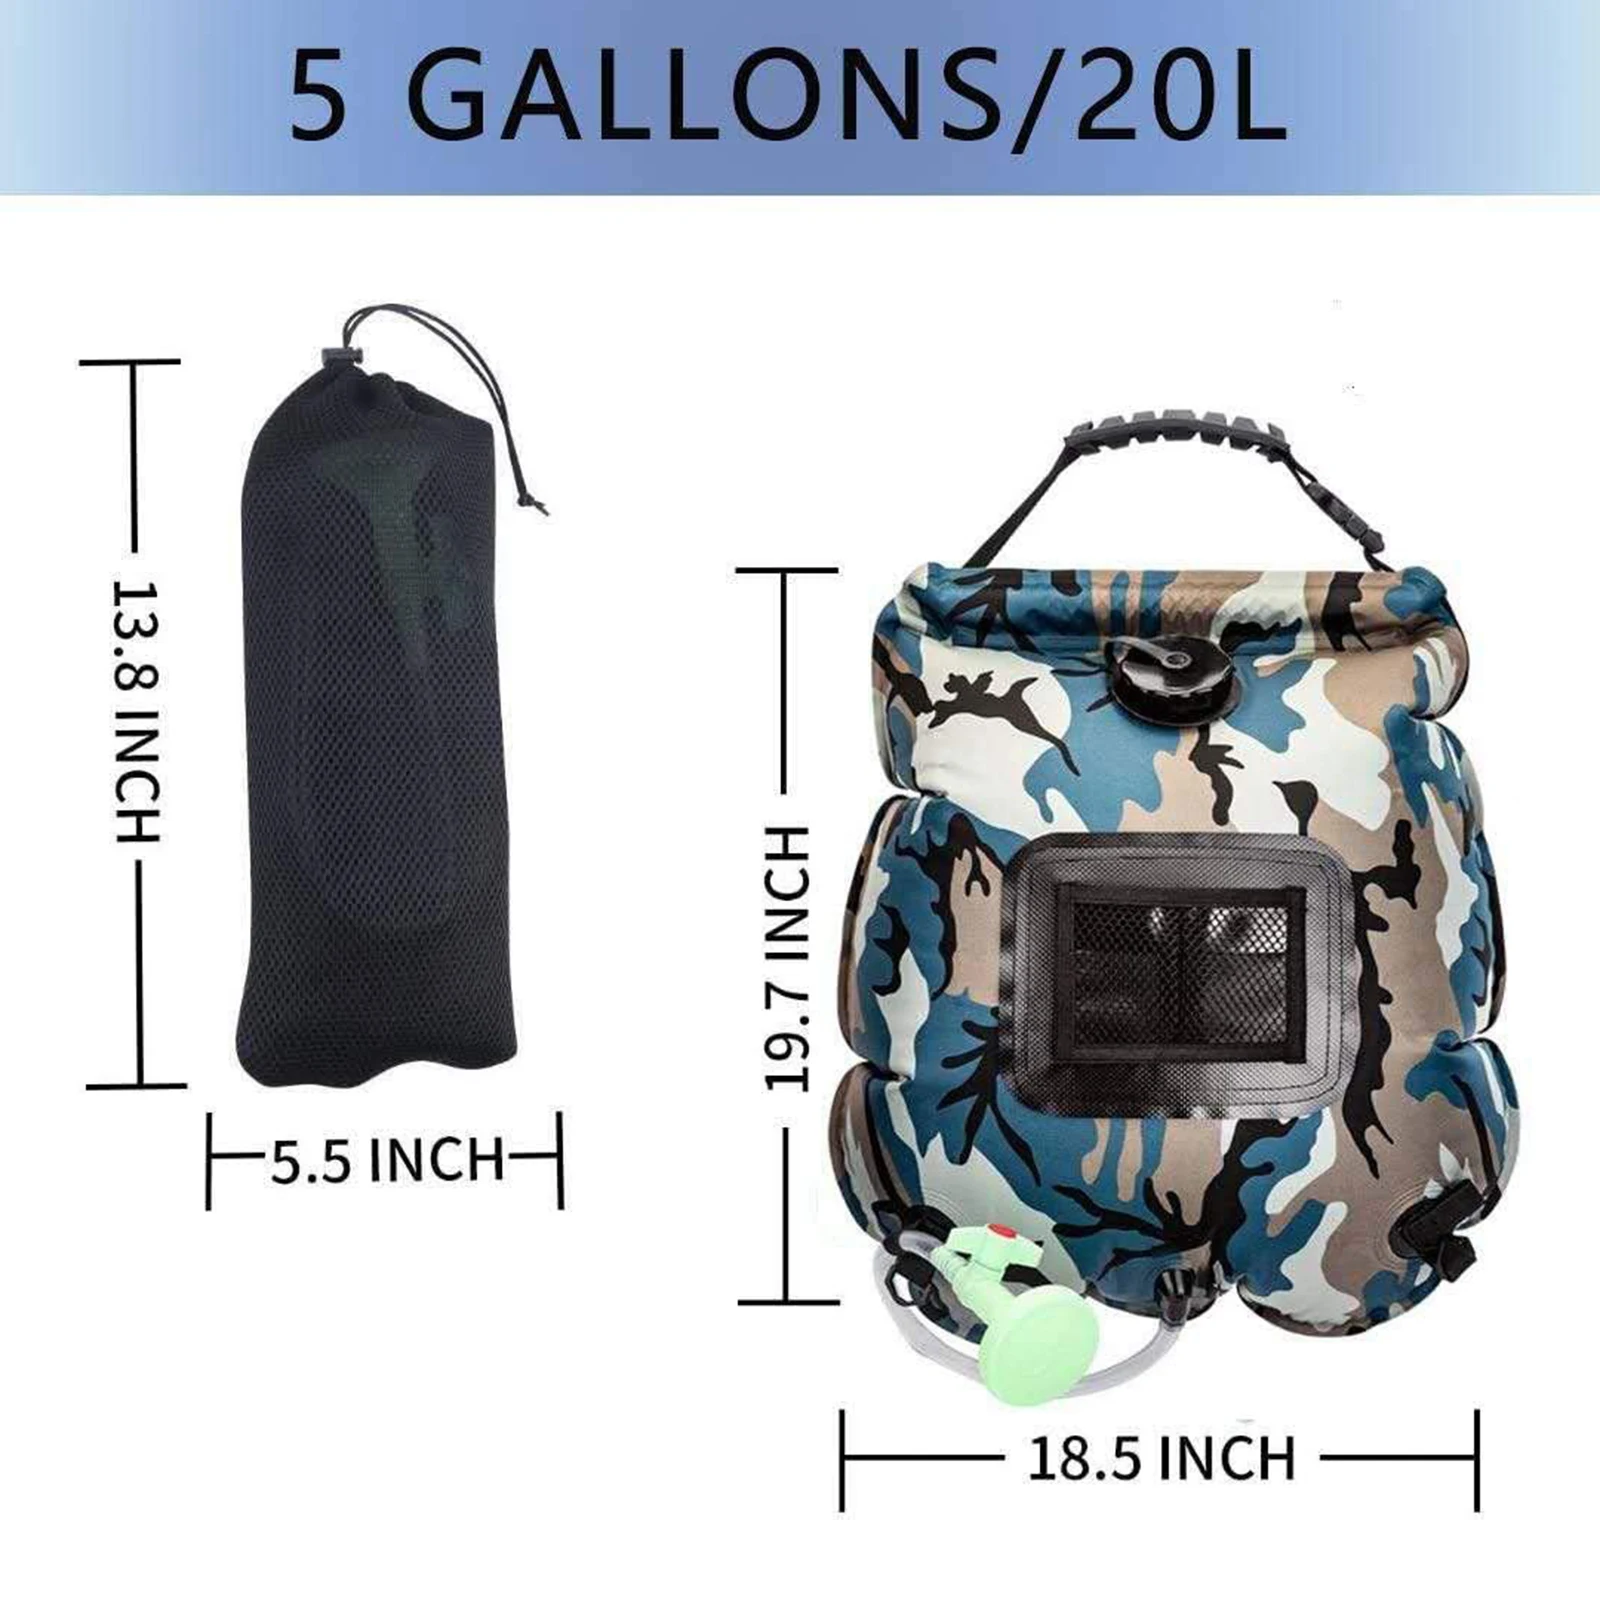 20L Water Bags Outdoor Camping Solar Shower Bag Foldable Heating Camp Shower Hiking Climbing Bath Bag Switchable Shower Head